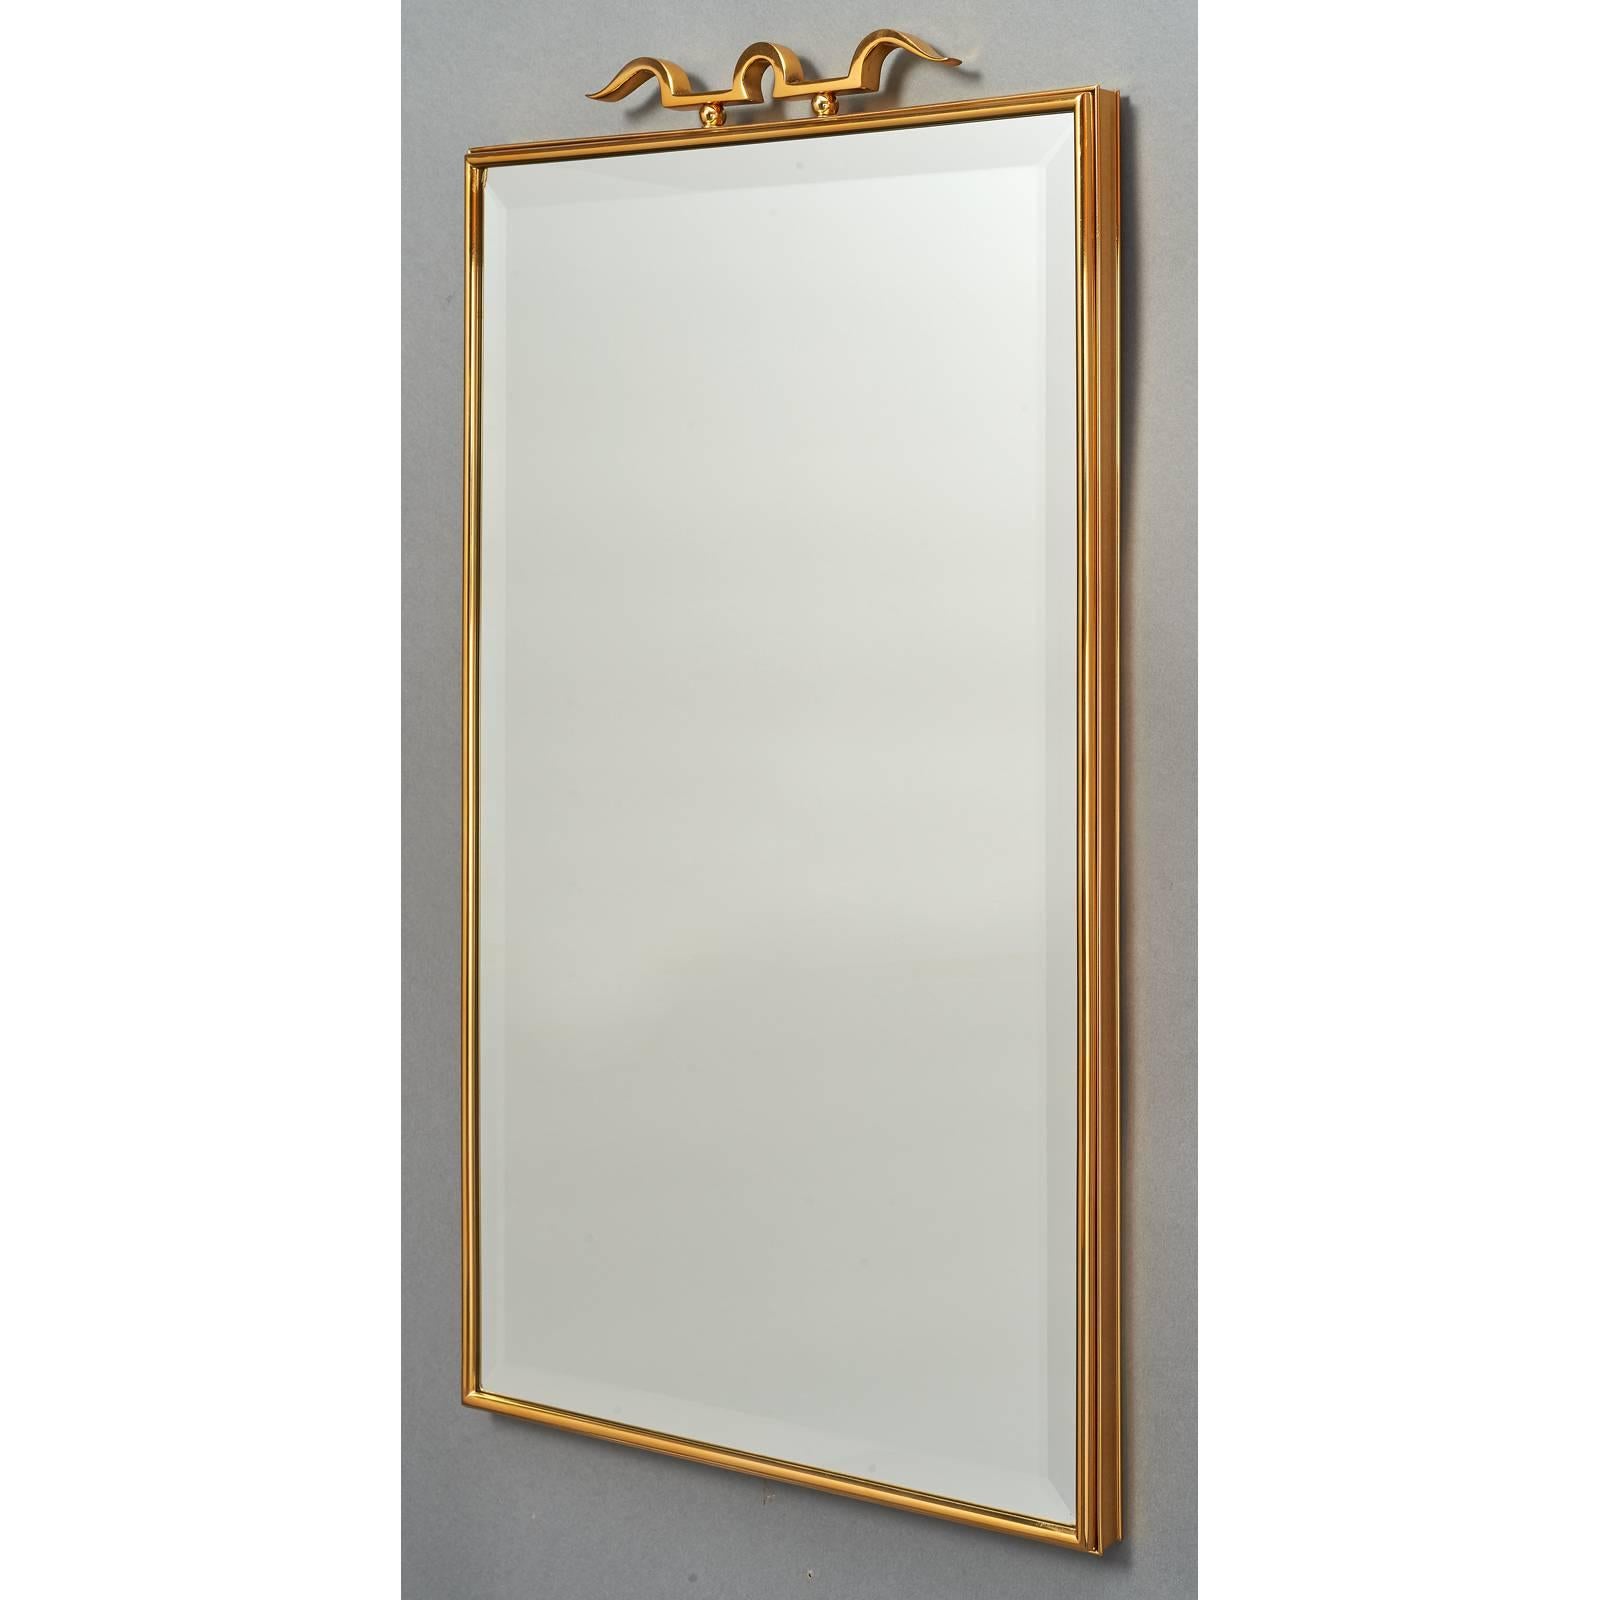 Italy, 1950s.
An elegant pair of beautifully tailored polished bronze mirrors with double frames and stylized crossbow motif, in the manner of Gio Ponti. Beveled glass.

Measure: 19.5 x 33.